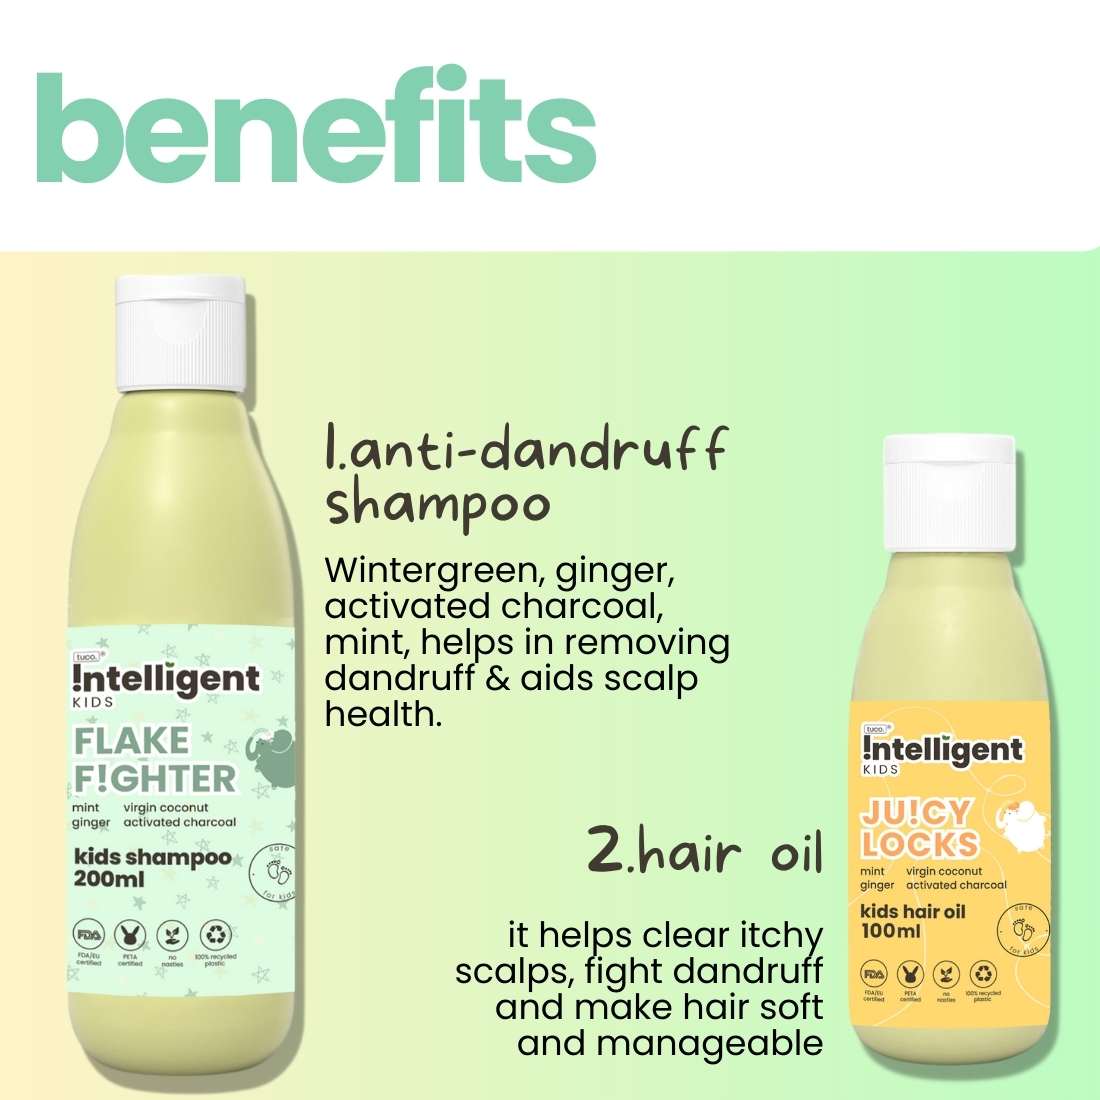 TuCo Intelligent Kids Anti-dandruff Oil & Shampoo Combo with Wintergreen, Ginger, Activated Charcoal, Mint & Virgin Coconut Oil. A comprehensive and gentle hair care solution designed to effectively combat dandruff, promotes scalp health & and promote a healthy scalp for kids